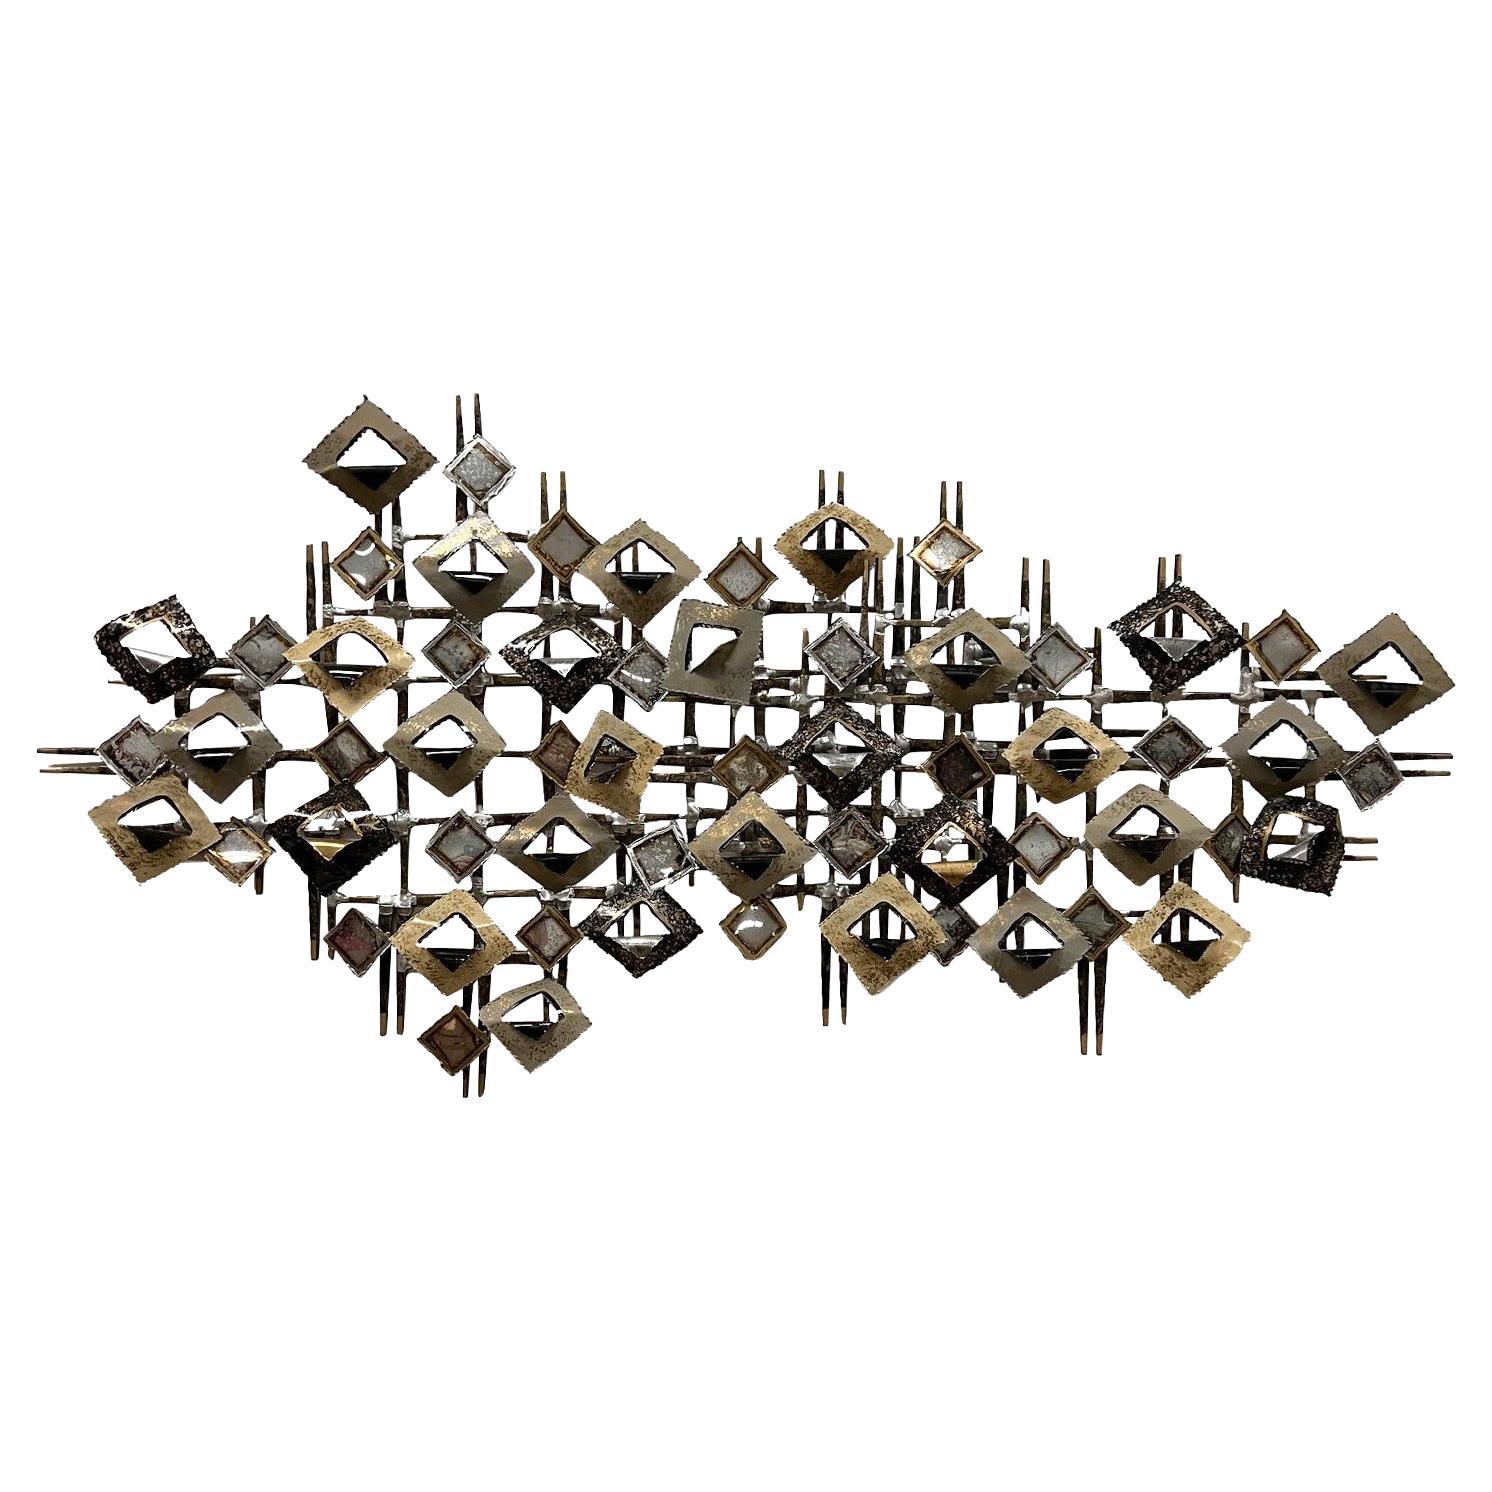 20th Century American Abstract Brutalist Metal Wall Sculpture by Linda Casetti